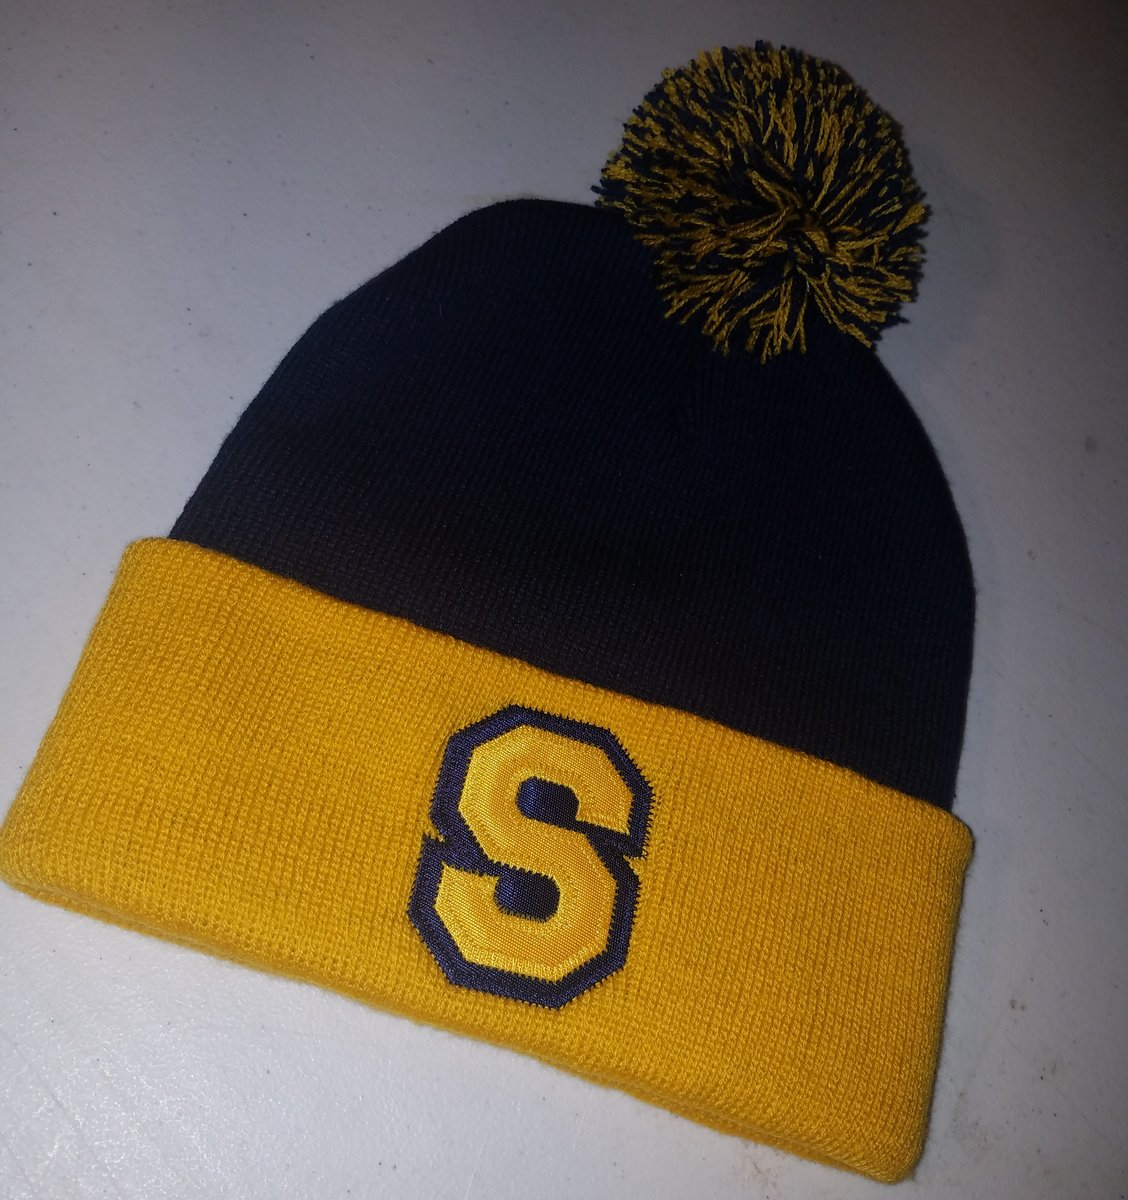 Cuffed Navy and Gold 'S' beanie | PresherInk